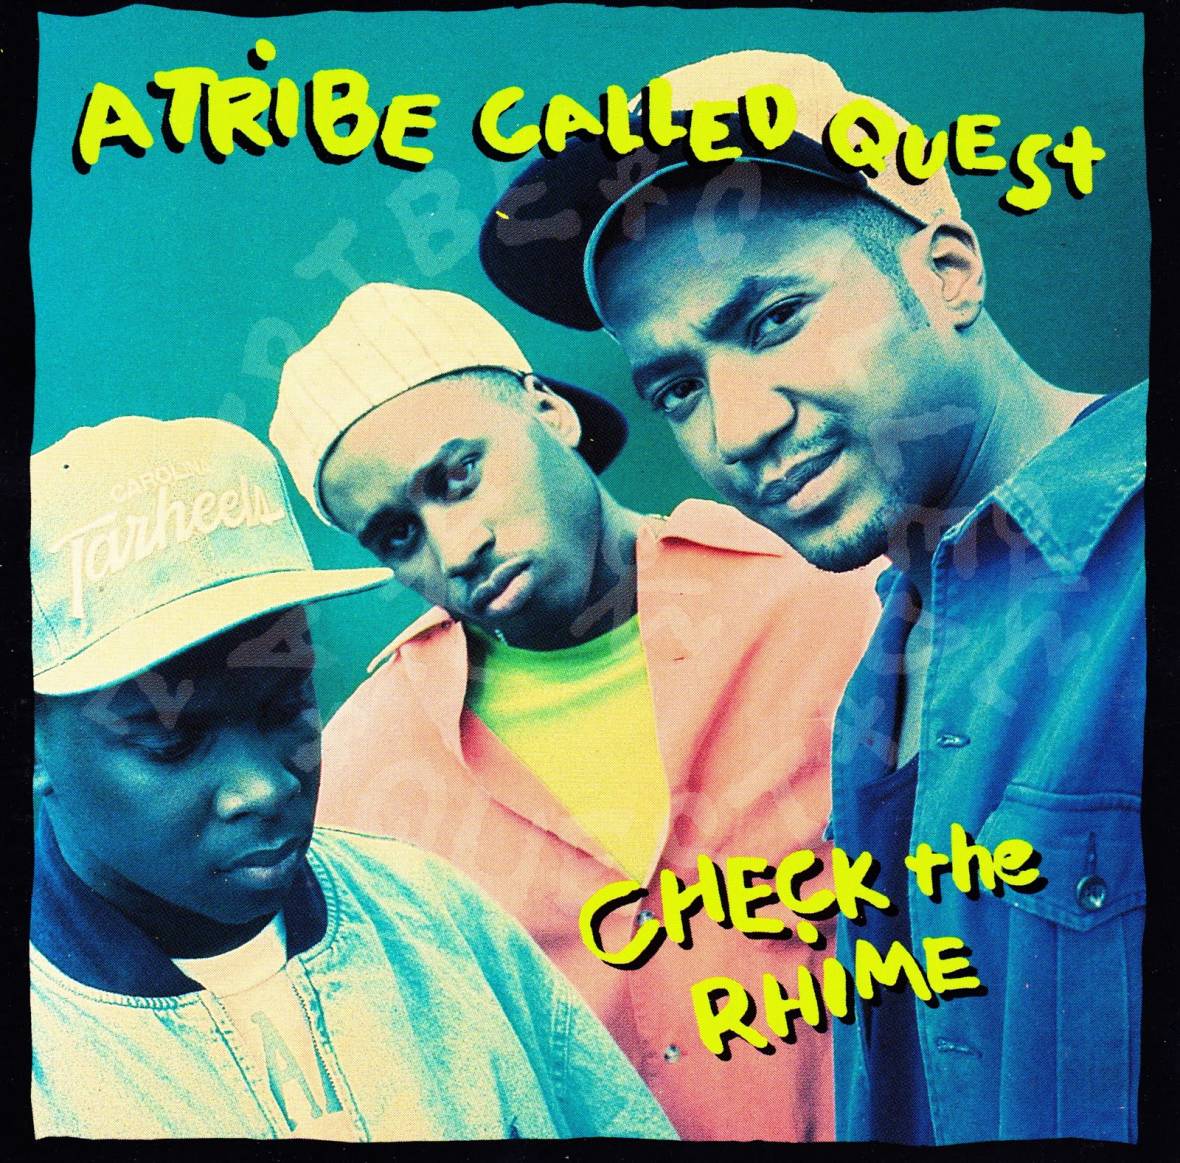 'Check the Rhime' 12", A Tribe Called Quest, 1993.